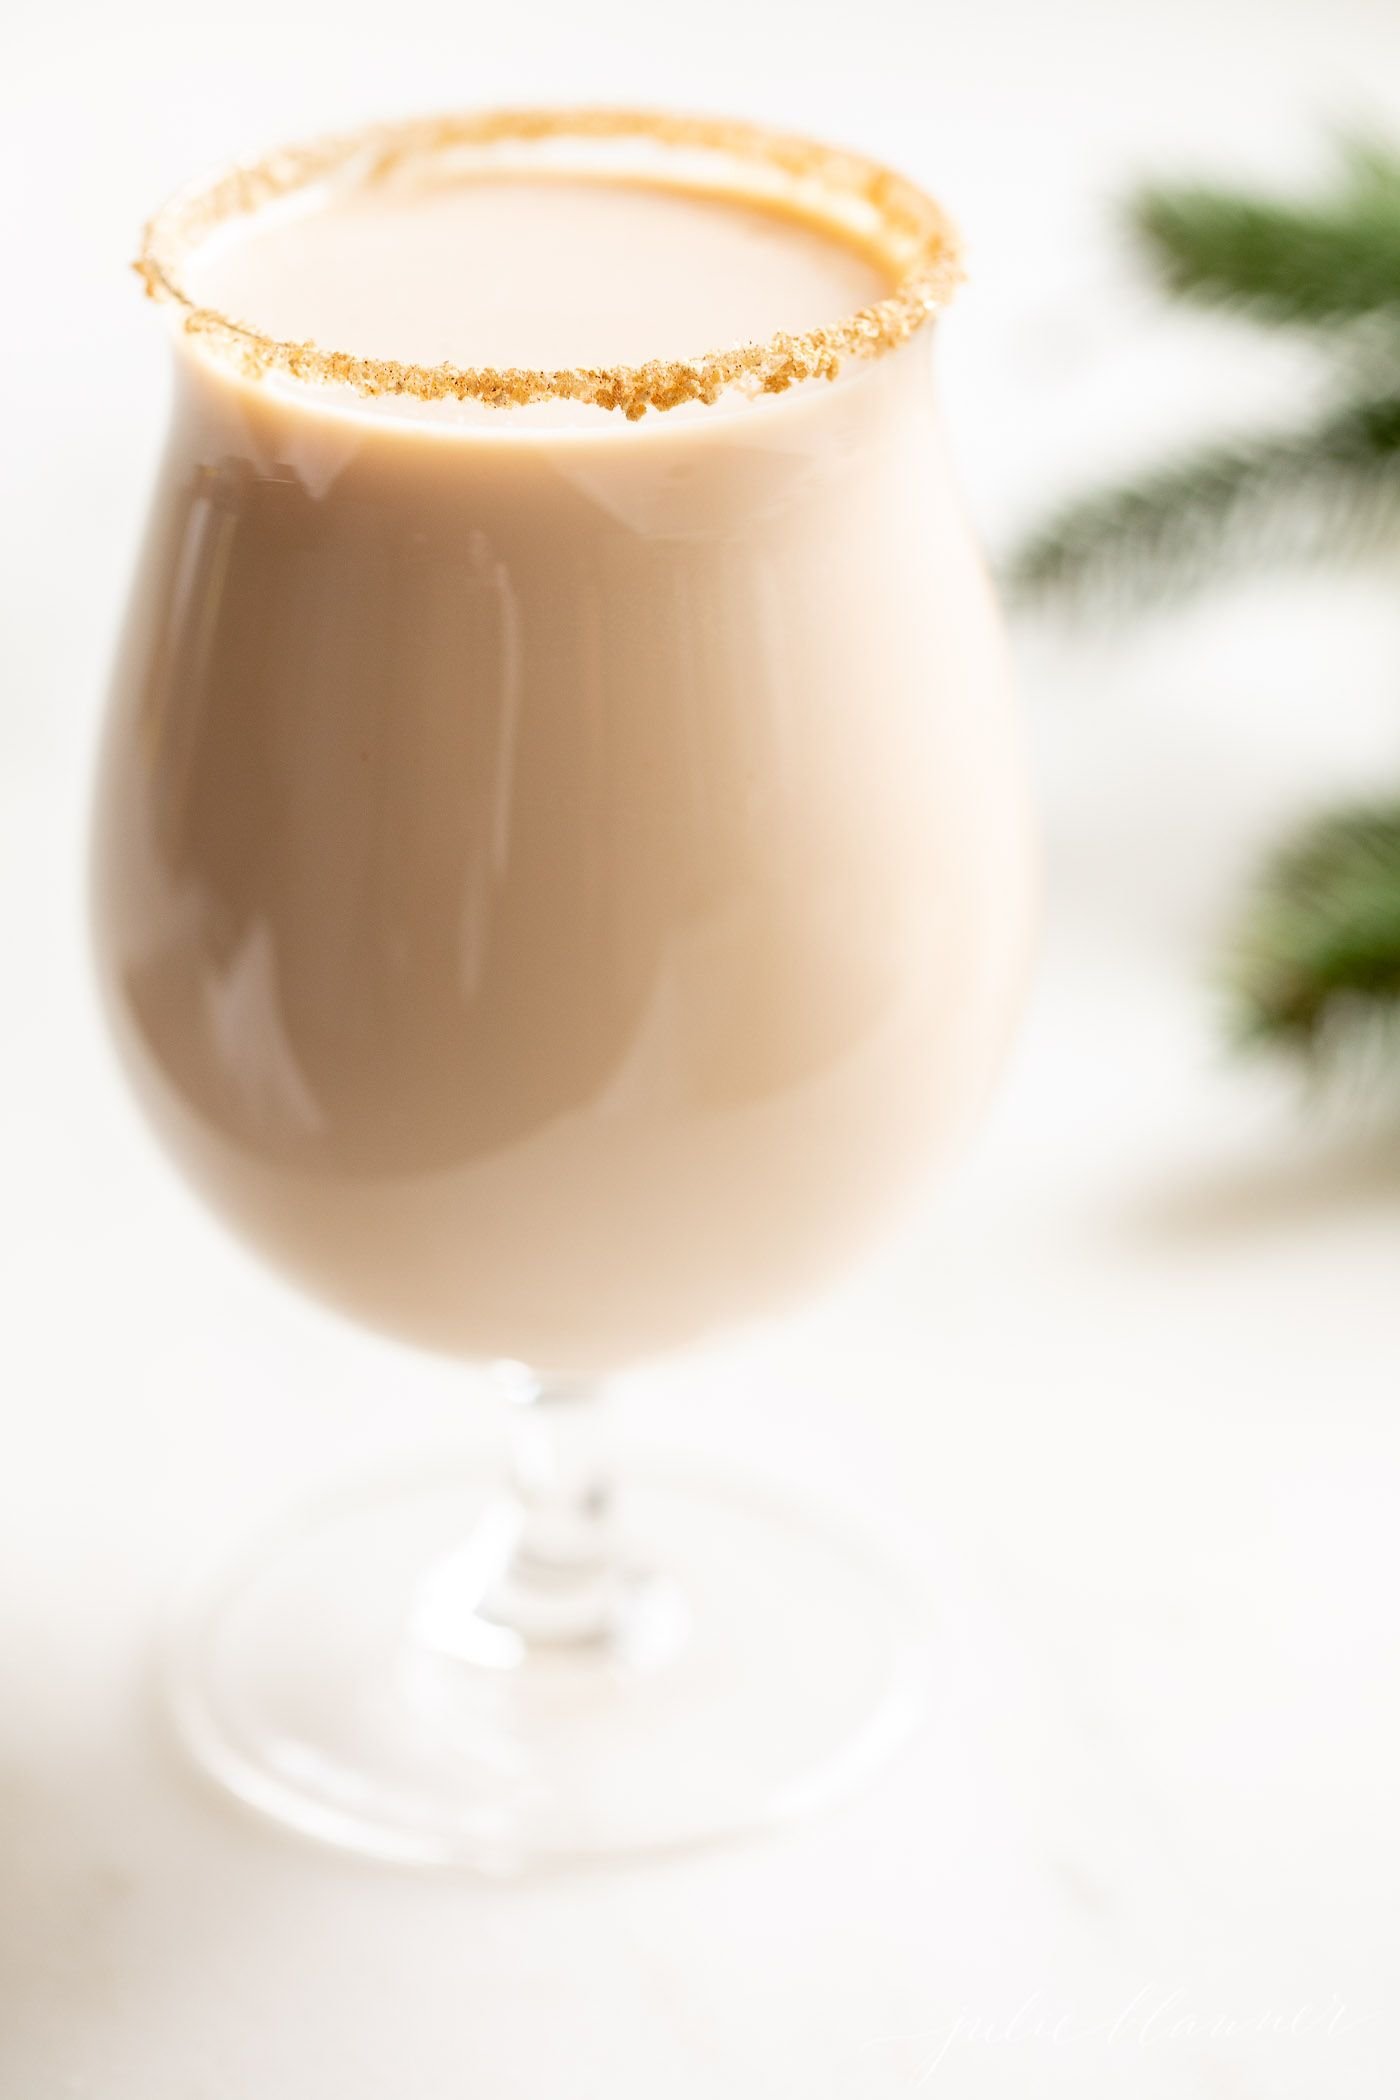 A clear glass with an oatmeal cookie cocktail, fresh winter greens on the edge of the image.